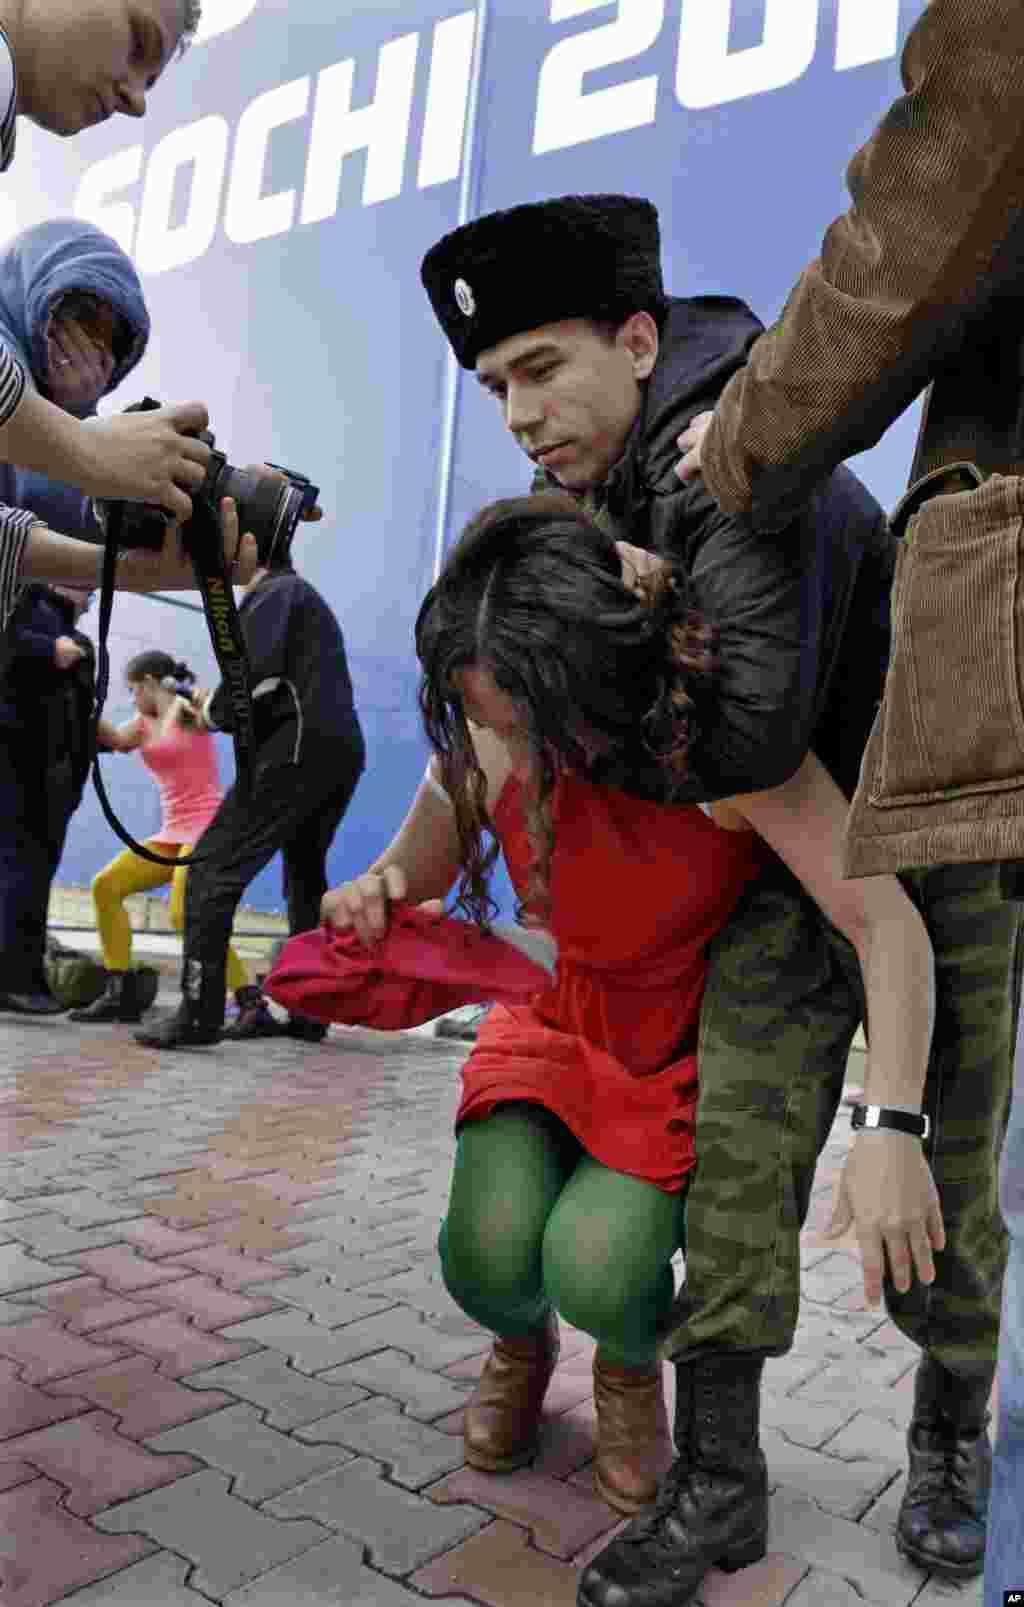 A member of Pussy Riot is restrained by a Cossack after the attack in Sochi.